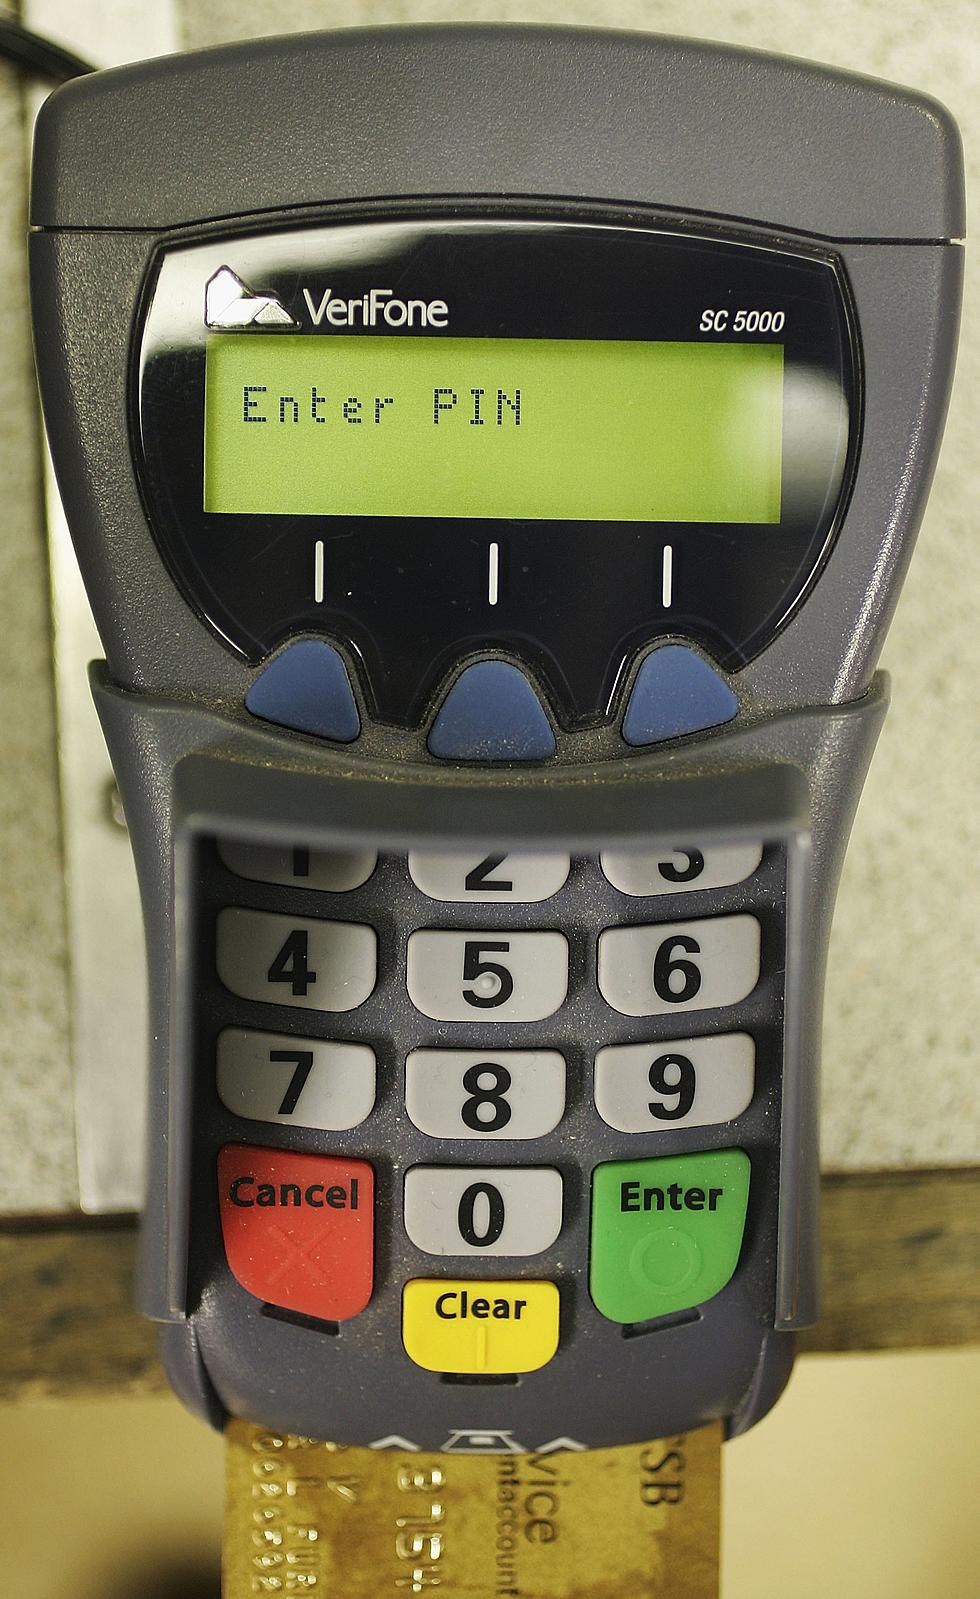 If Your Pin Number Is One Of These Numbers – Change Immediately